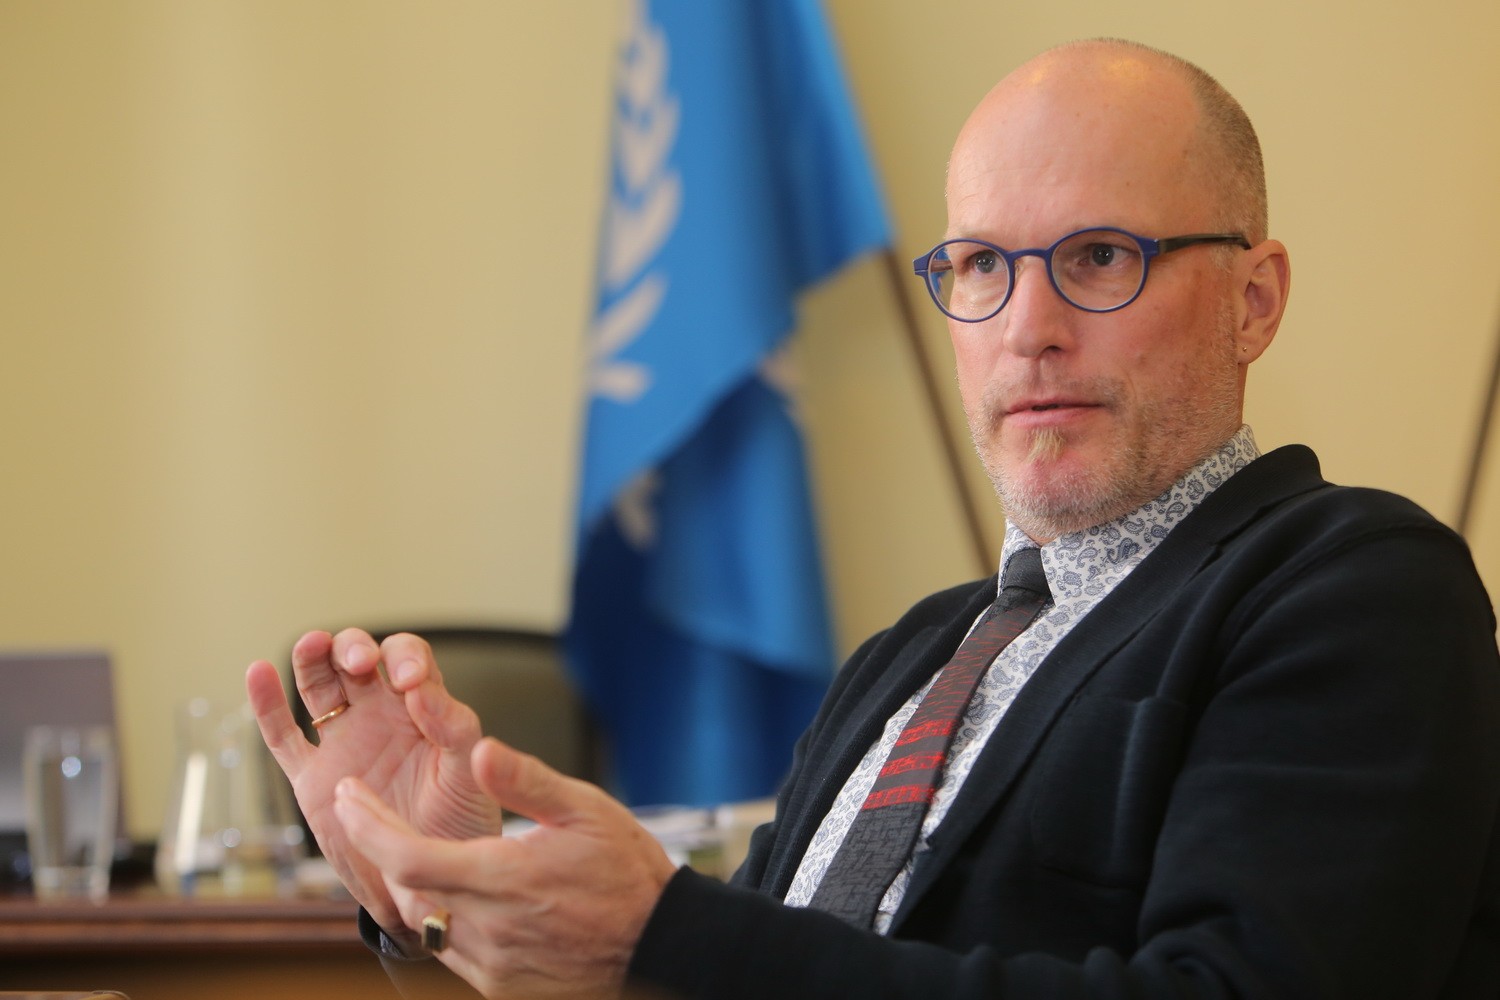 Janthomas Hiemstra, the country director of United Nations Development Program in Ukraine, talks to the Kyiv Post reporter in the UNDP office in Kyiv.